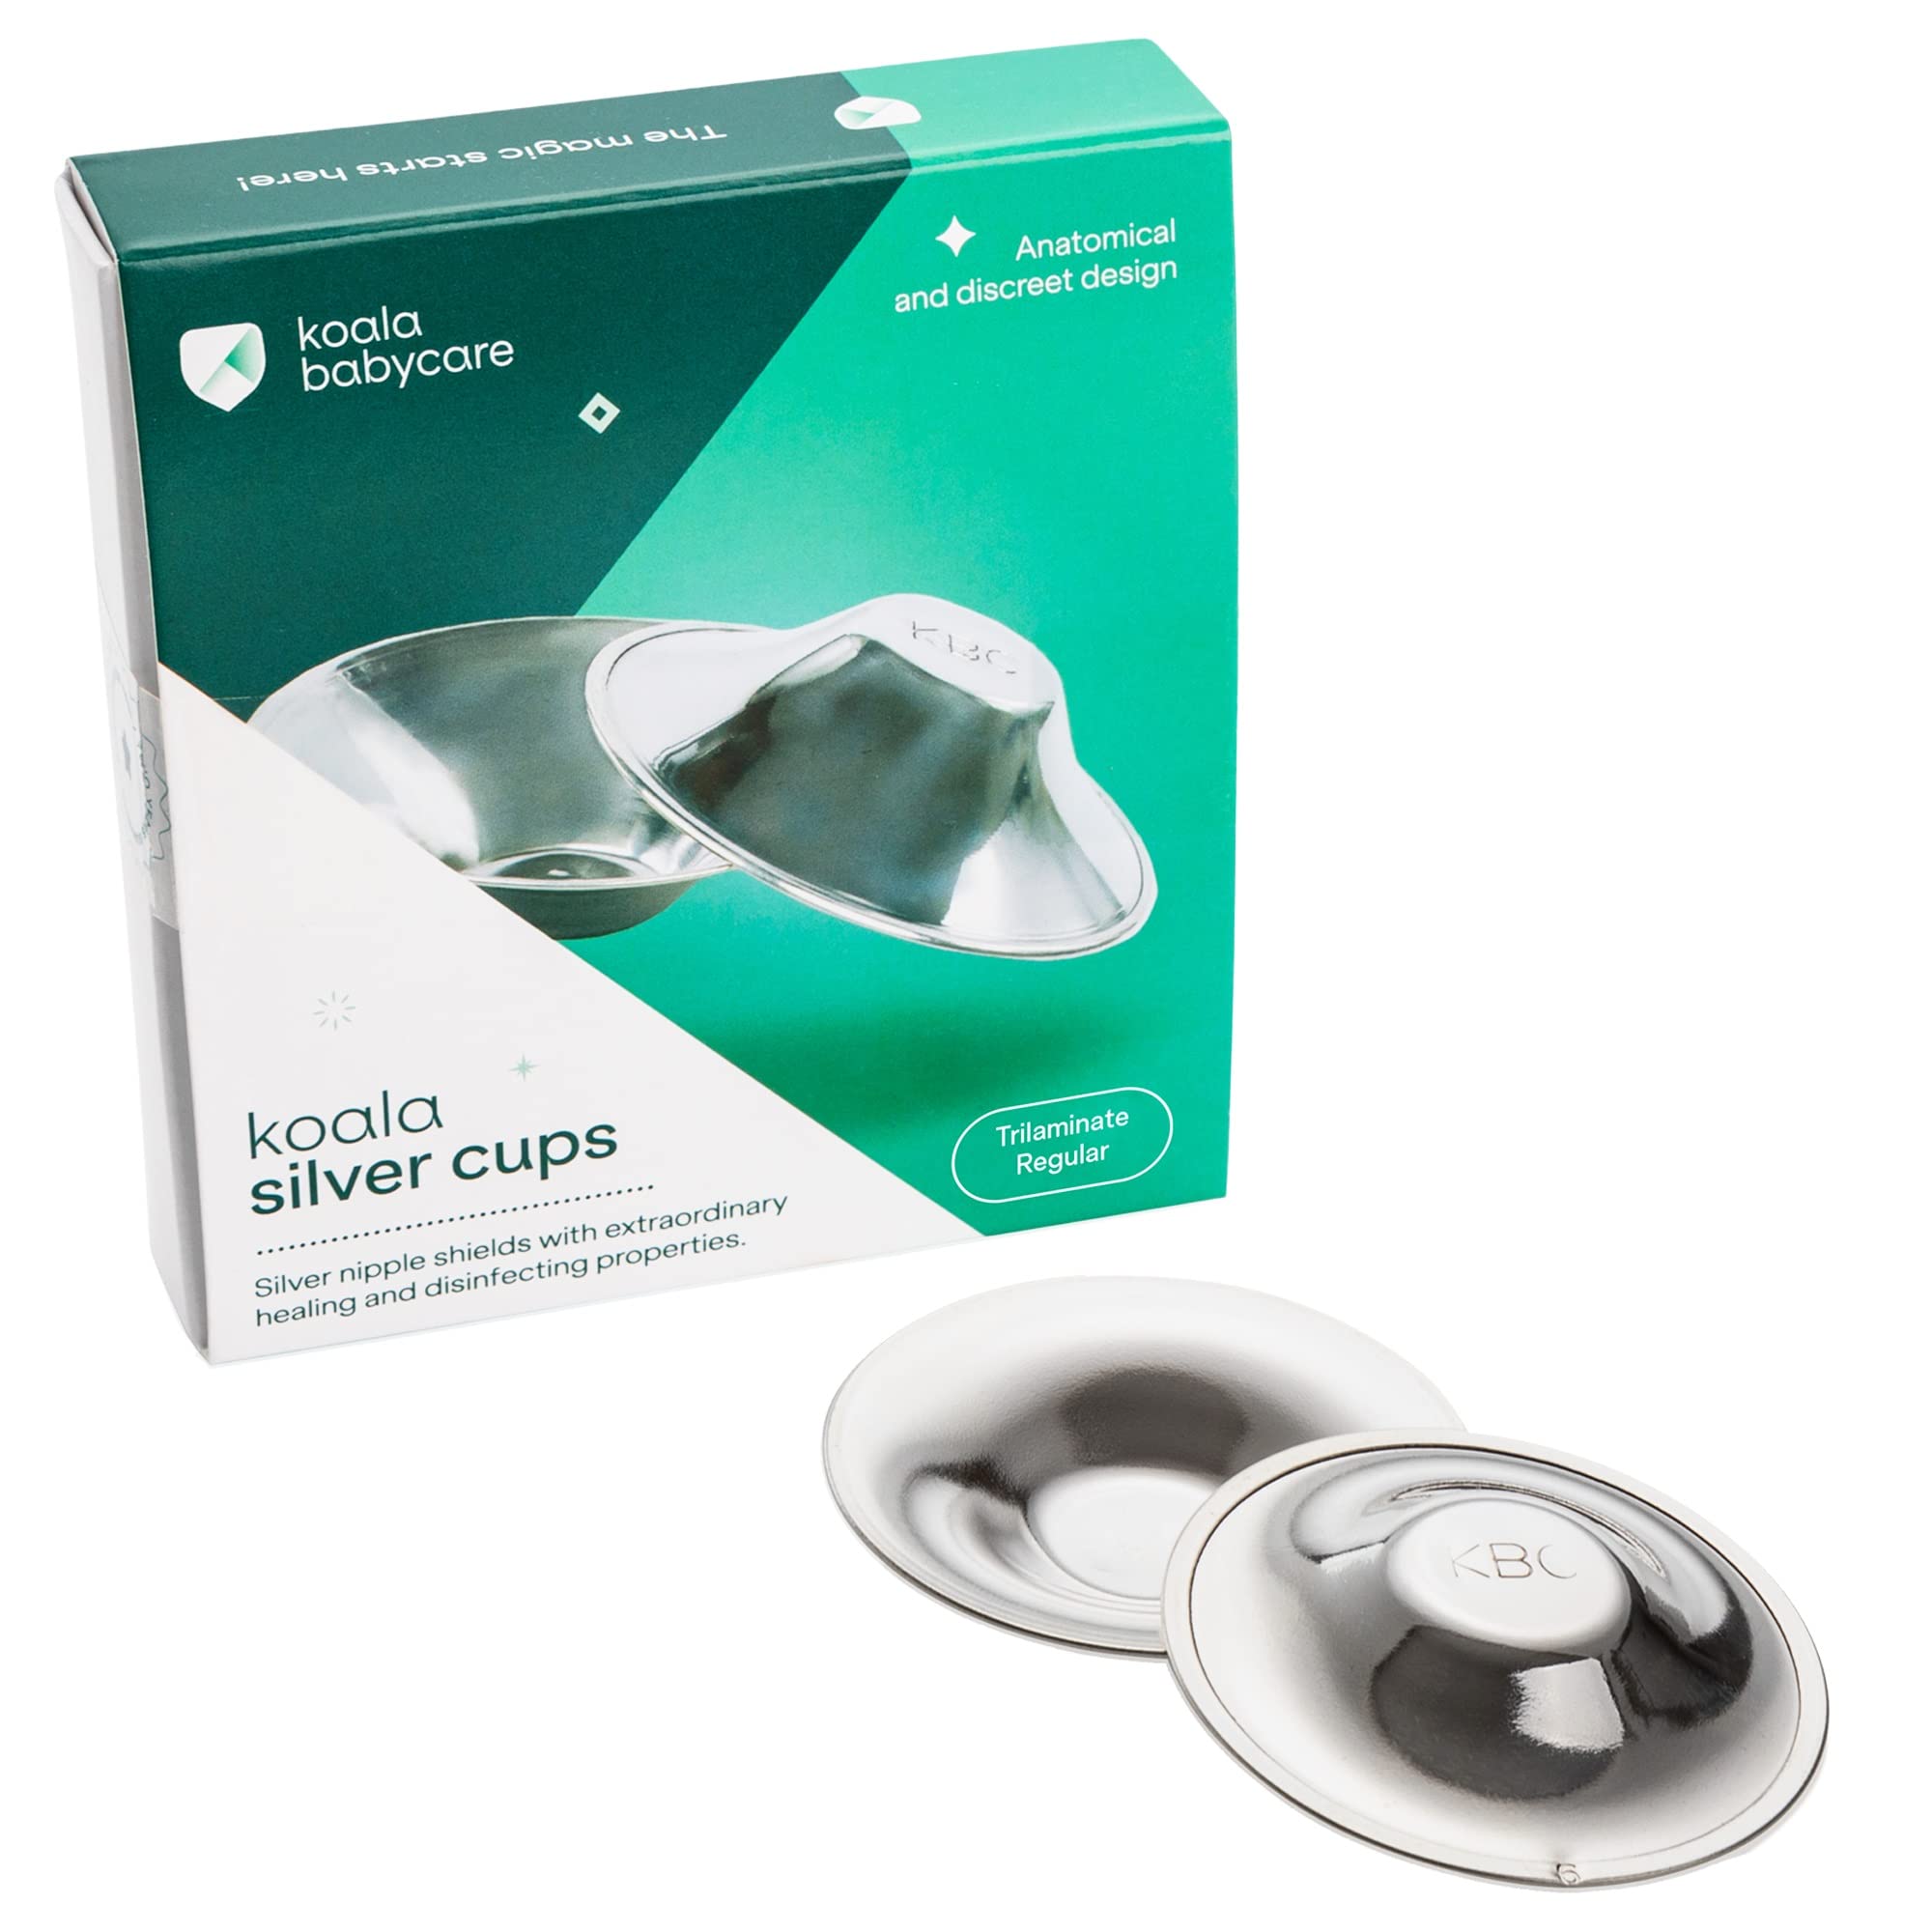 Koala Babycare The Original Silver Nursing Cups - Made in Italy - Protect  and Soothe - Tri-Laminate Silver - Standard Size Regular Trilaminate Silver